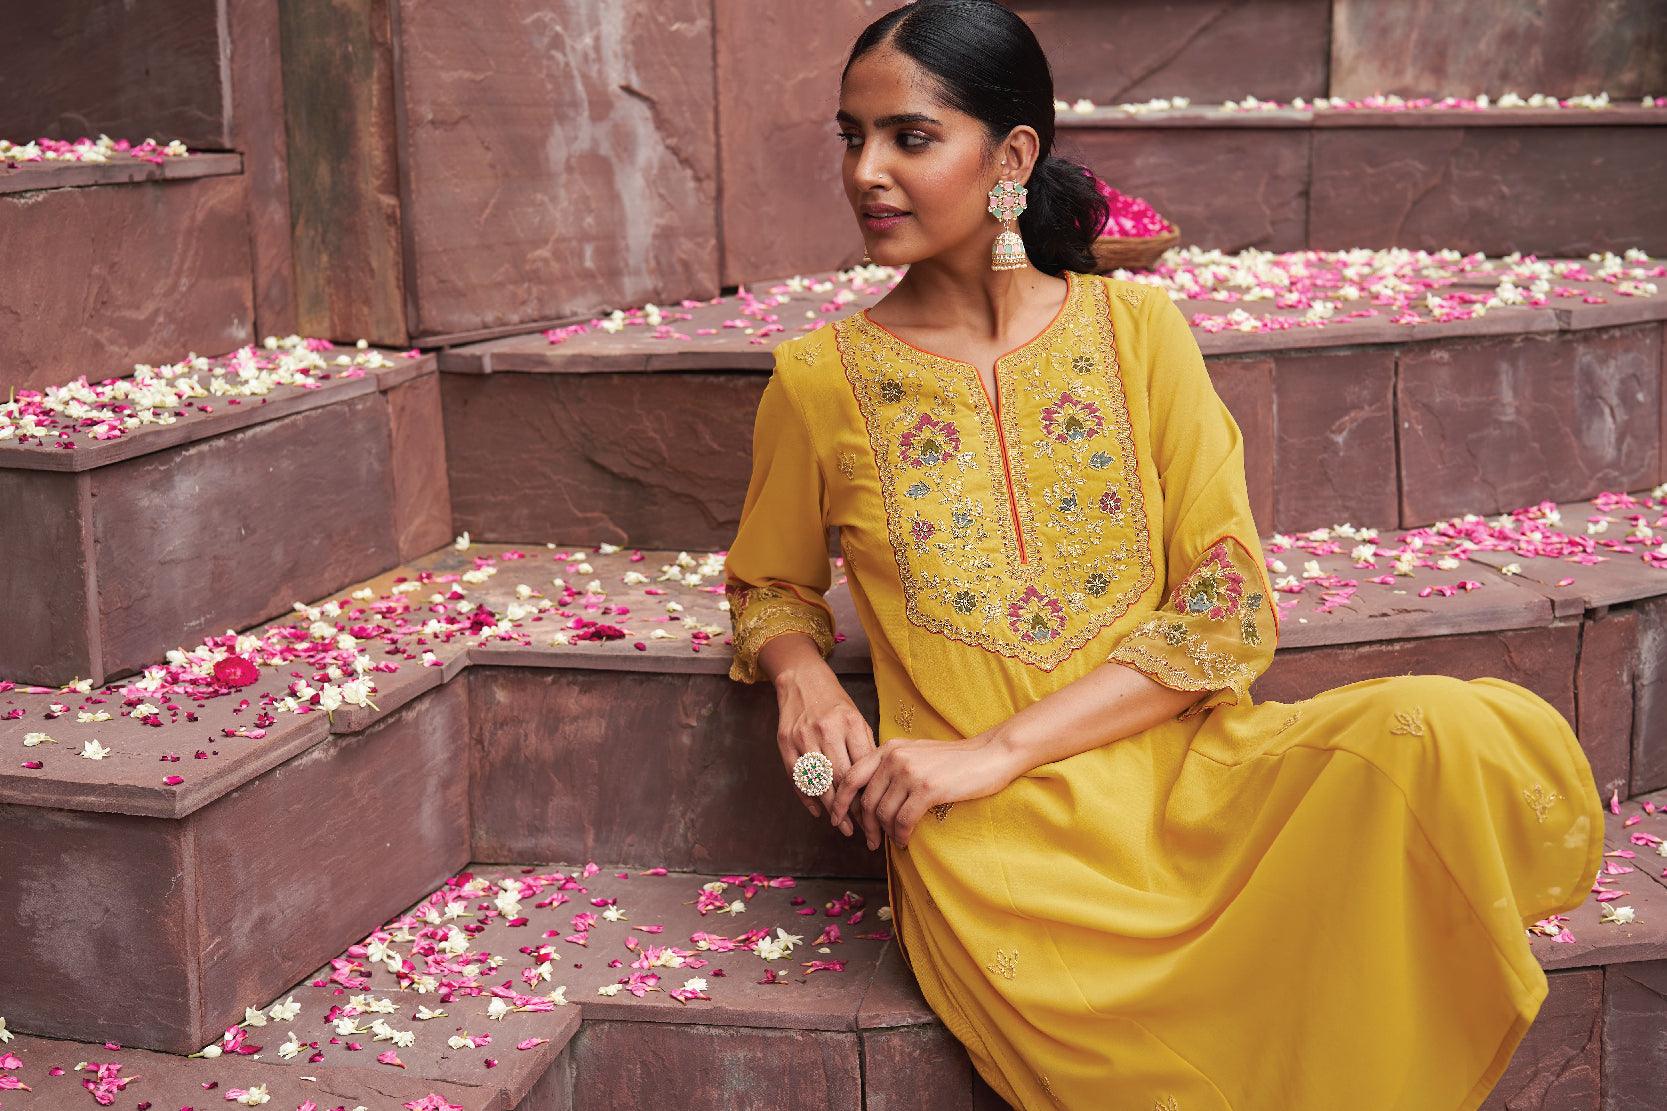 WOMEN’S DAY GIFT GUIDE: ETHNIC CLOTHING FOR THE FASHION-FORWARD WOMAN - Lakshita